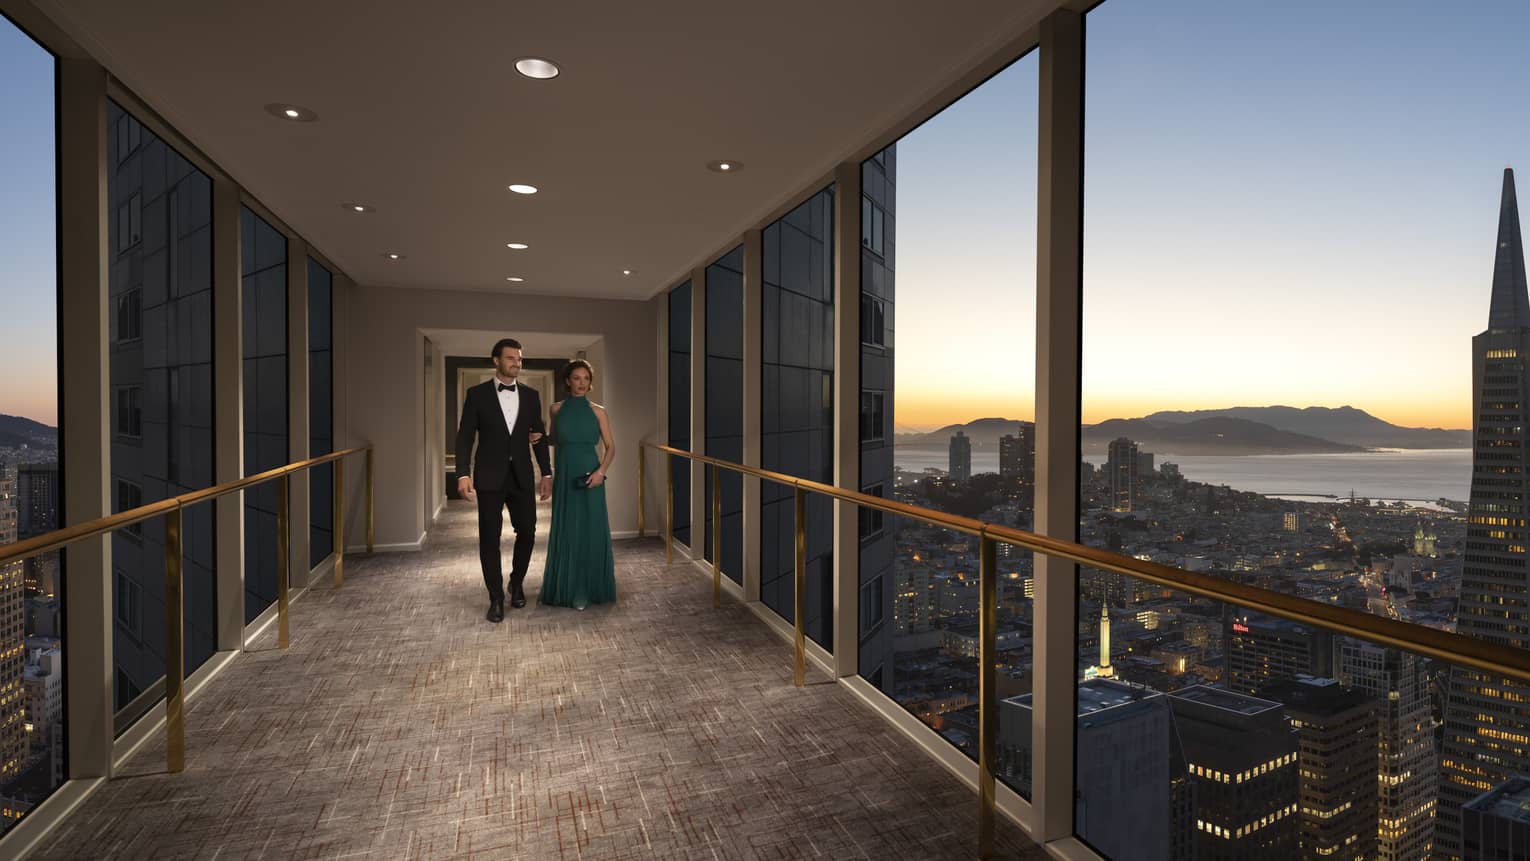 A man and woman in a suit and dress walking down a sky bridge.